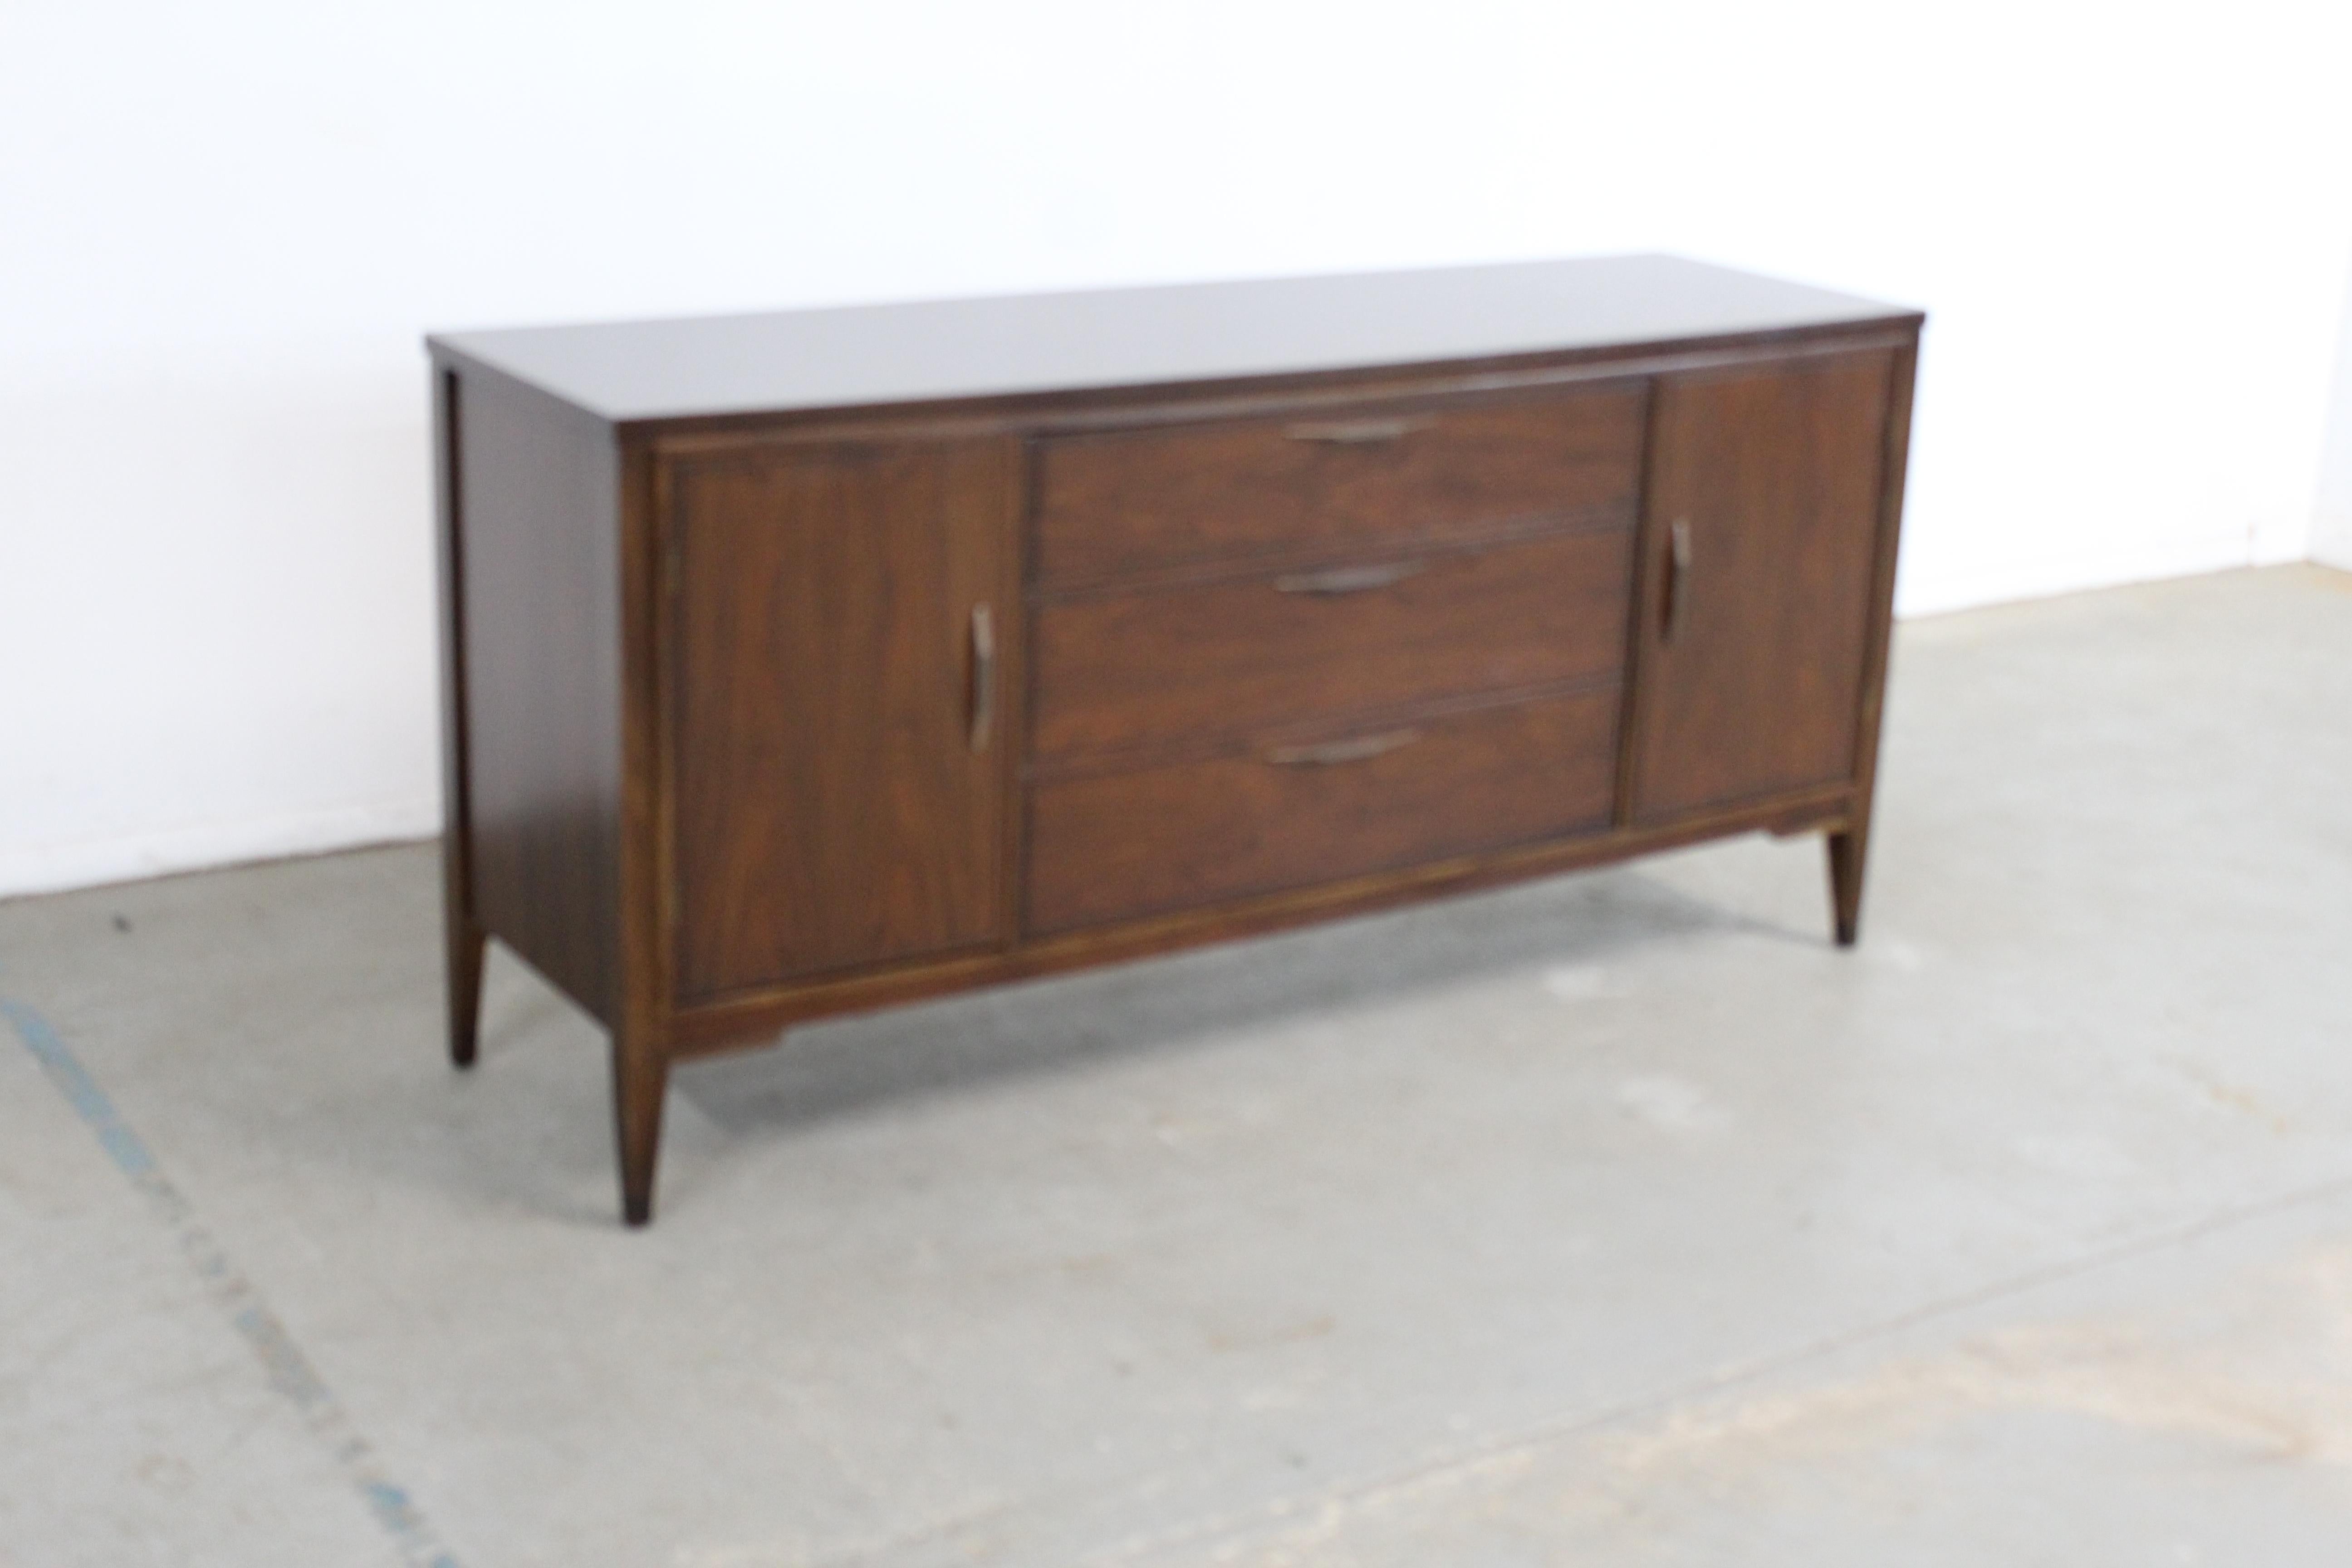 Mid Century Modern Walnut 2 Door Credenza/Sideboard by Broyhill

Offered is a beautiful Mid-Century Modern Walnut Credenza/Sideboard with ample storage space, which was designed by Broyhill. Features 3 drawers and 2 doors. The top shows like glass